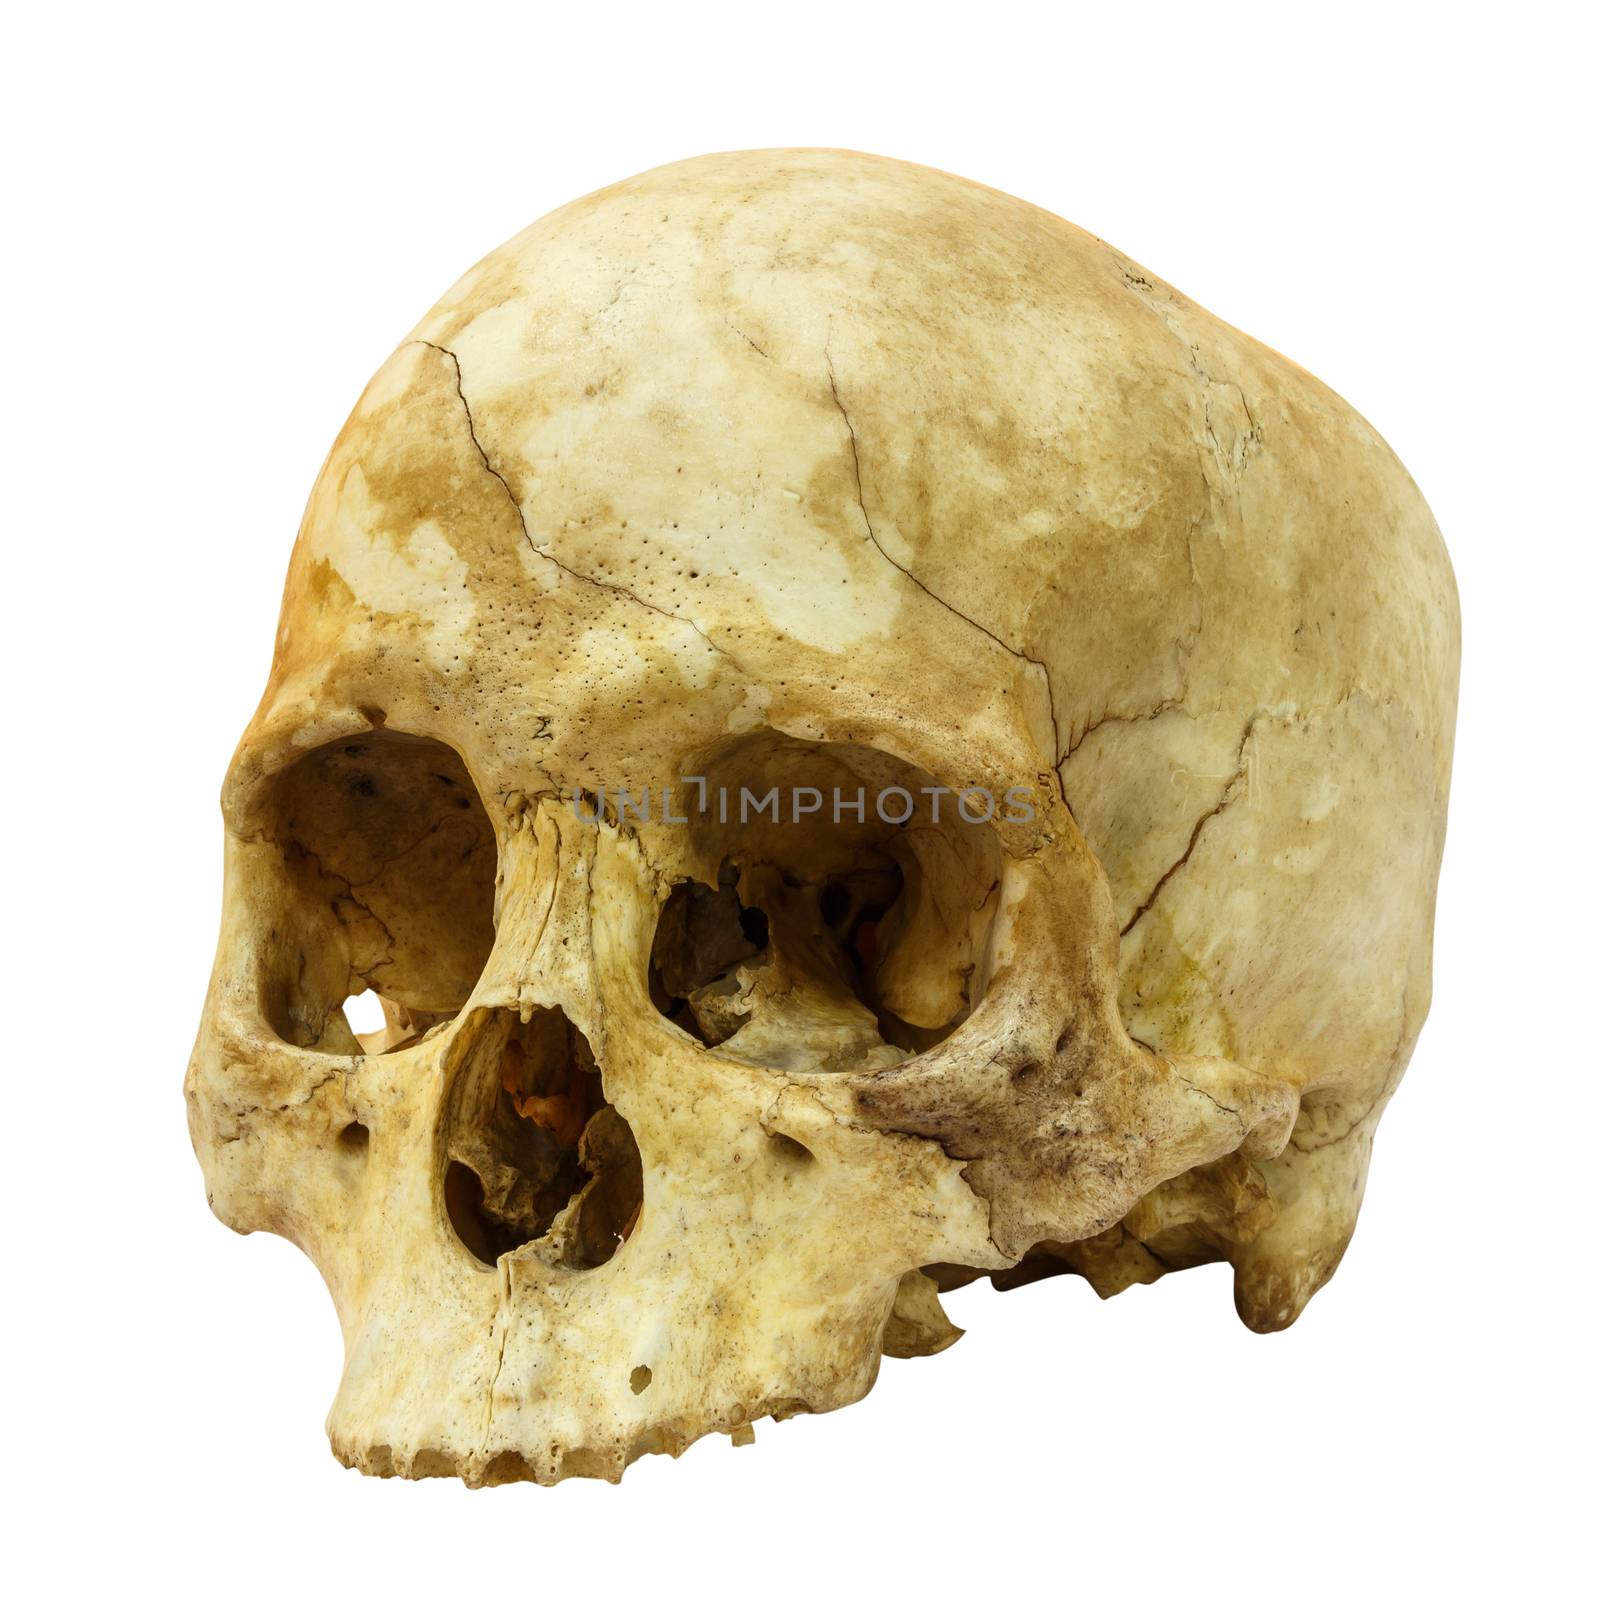 Human Skull Fracture(side) (Mongoloid,Asian) on isolated background by stockdevil